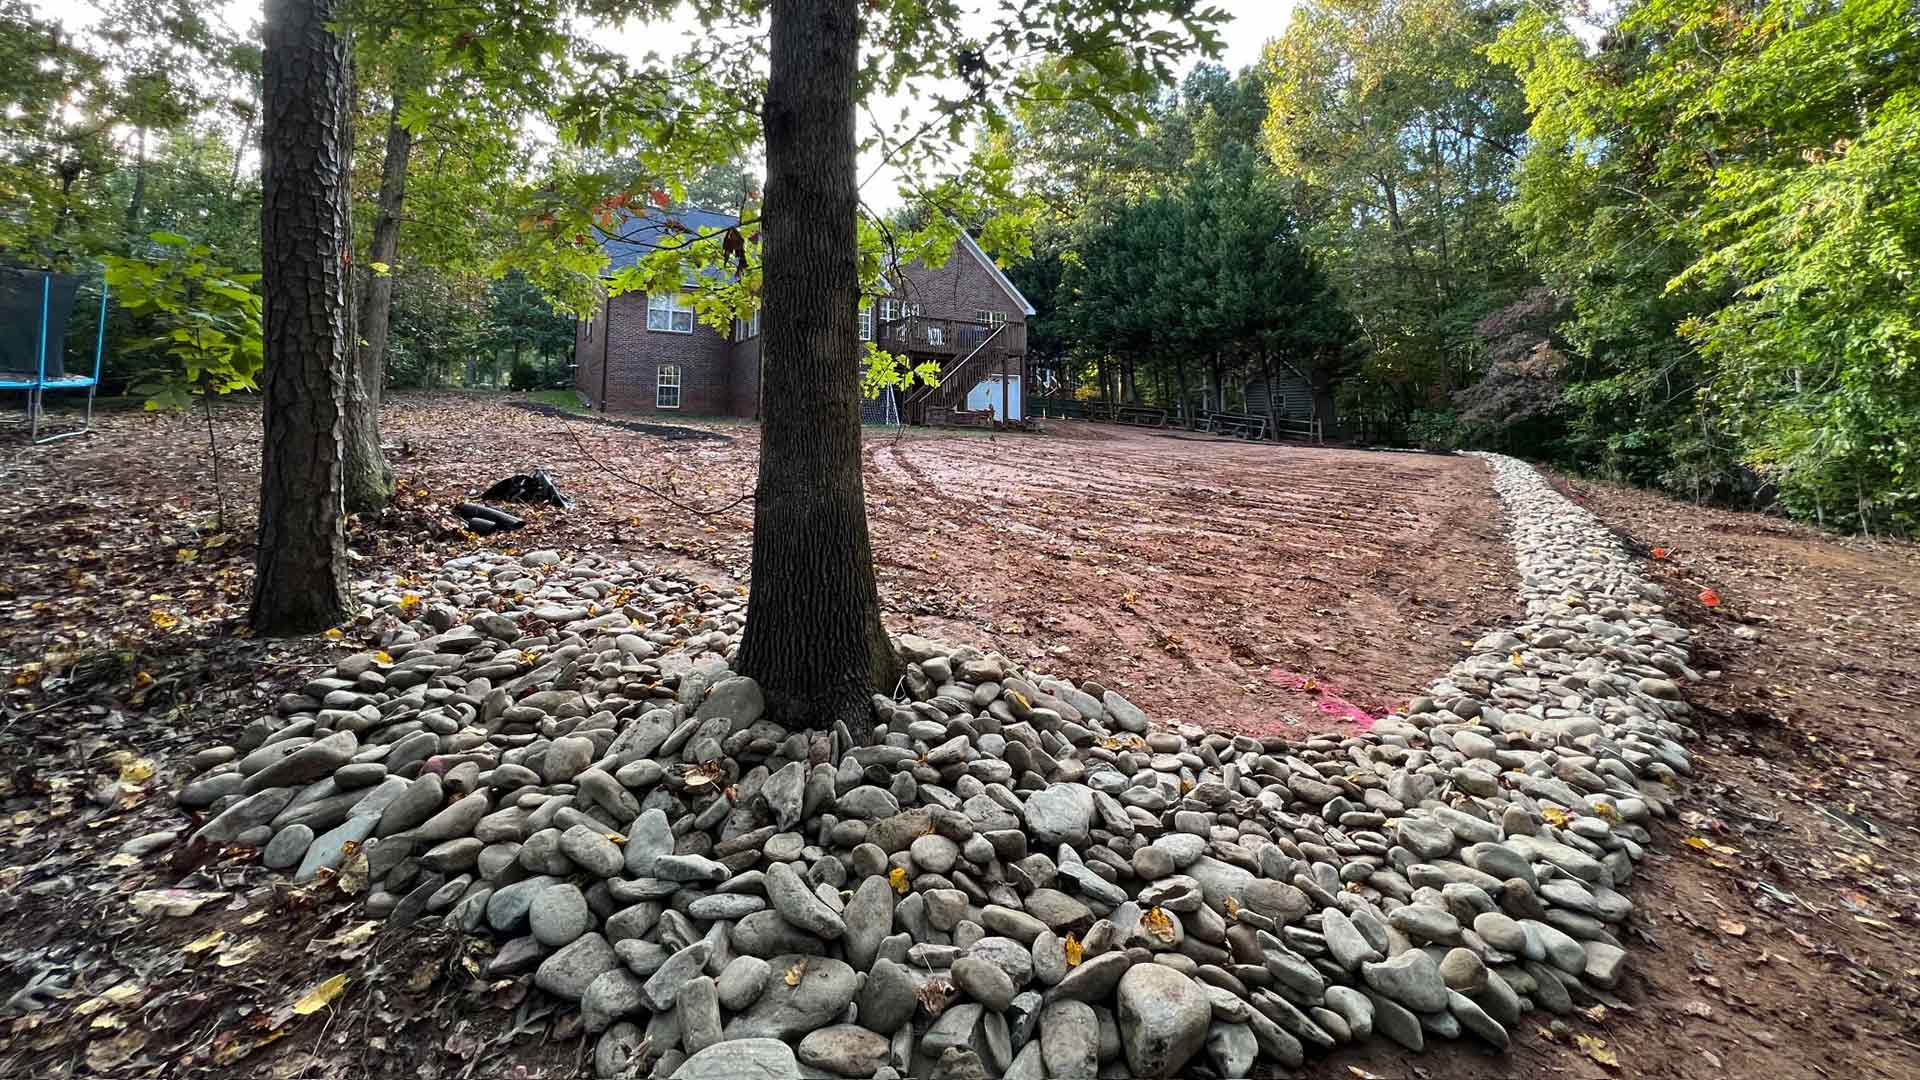 A new landscaping project underway with rocks installed and the lawn dug up in Matthews, NC and nearby areas.